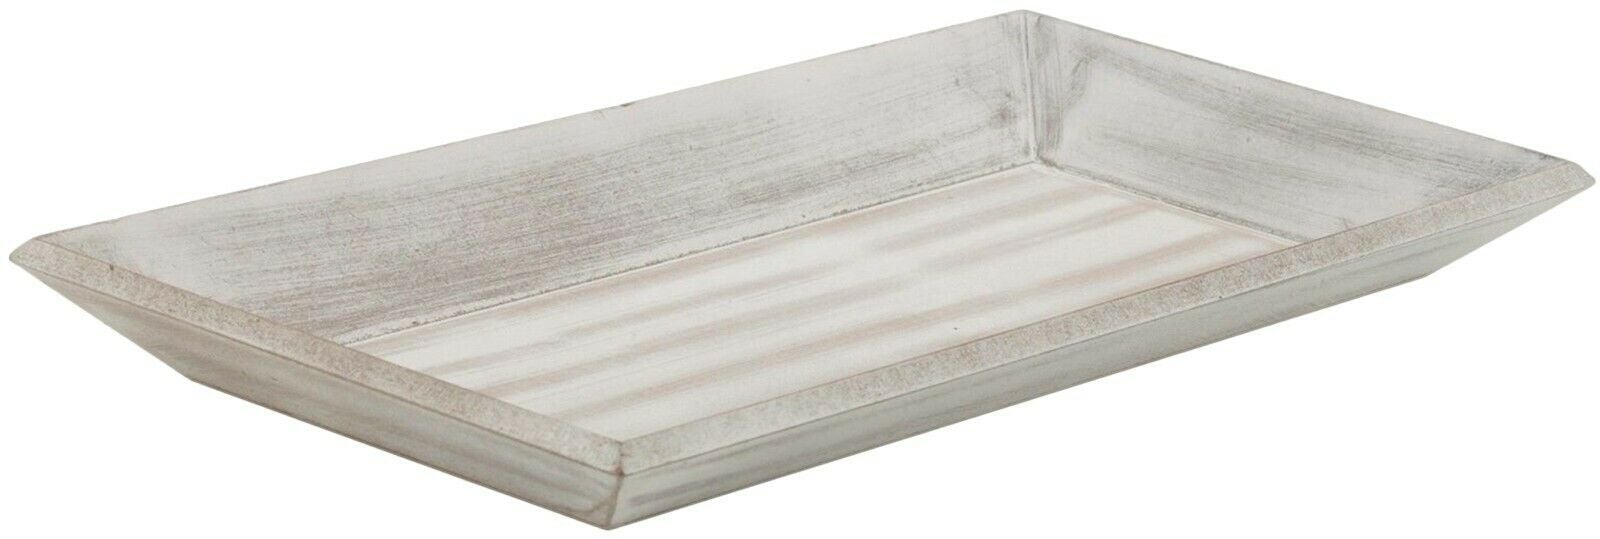 Large Wood Bread Basket Tray Distressed Rectangle Serving Tray Wedding Décor